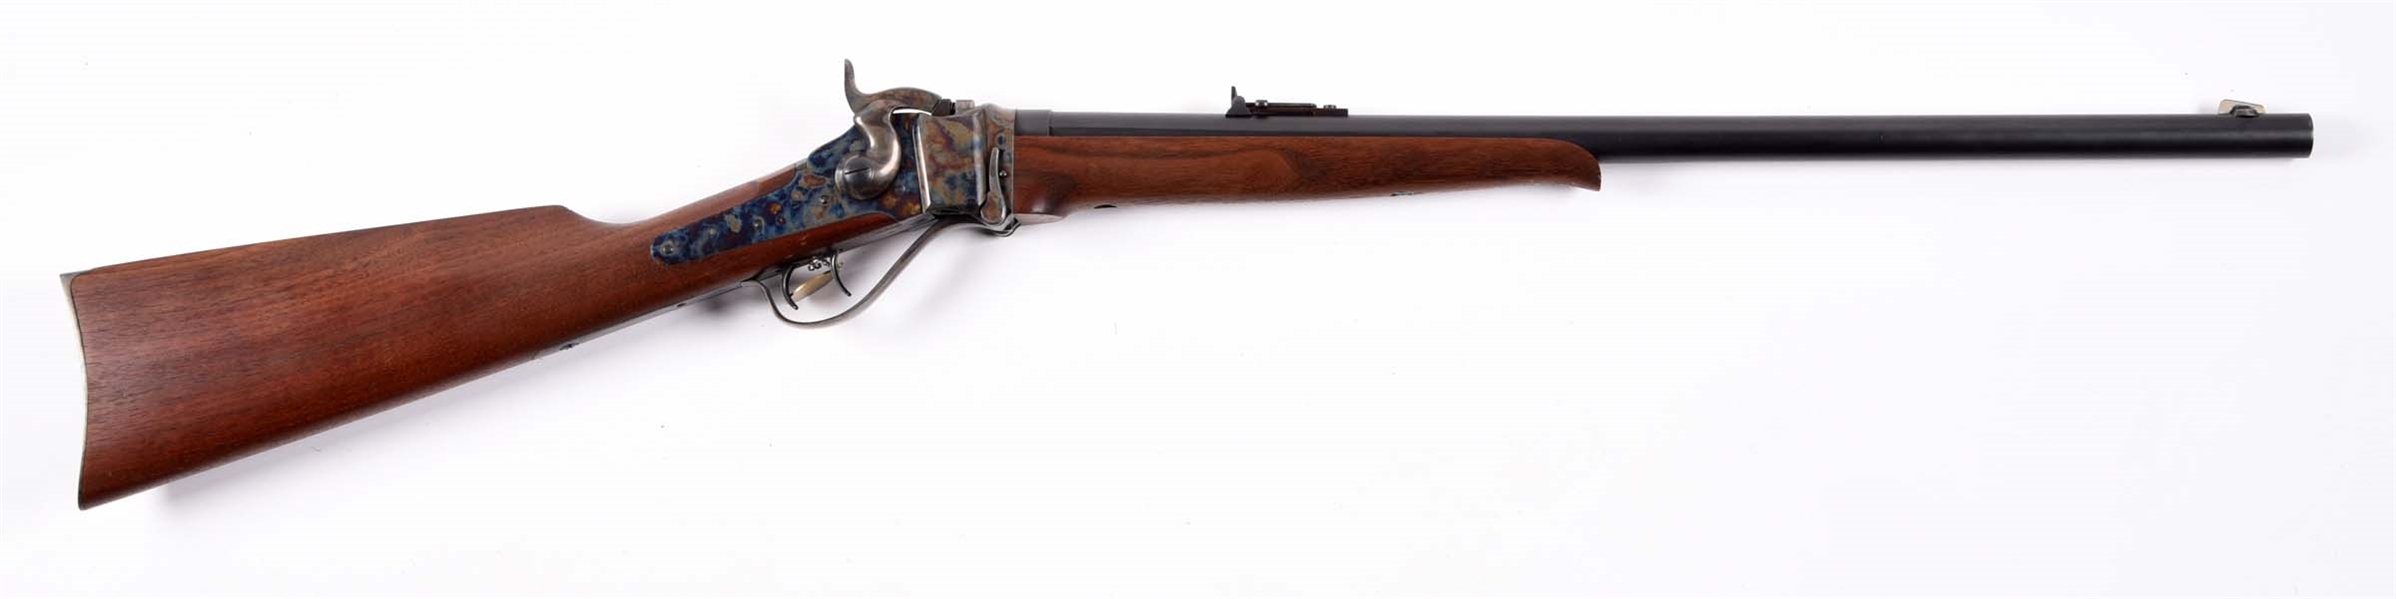 (M) S. SHARPS ARMS MODEL 1874 SINGLE SHOT RIFLE, IN 45-70.